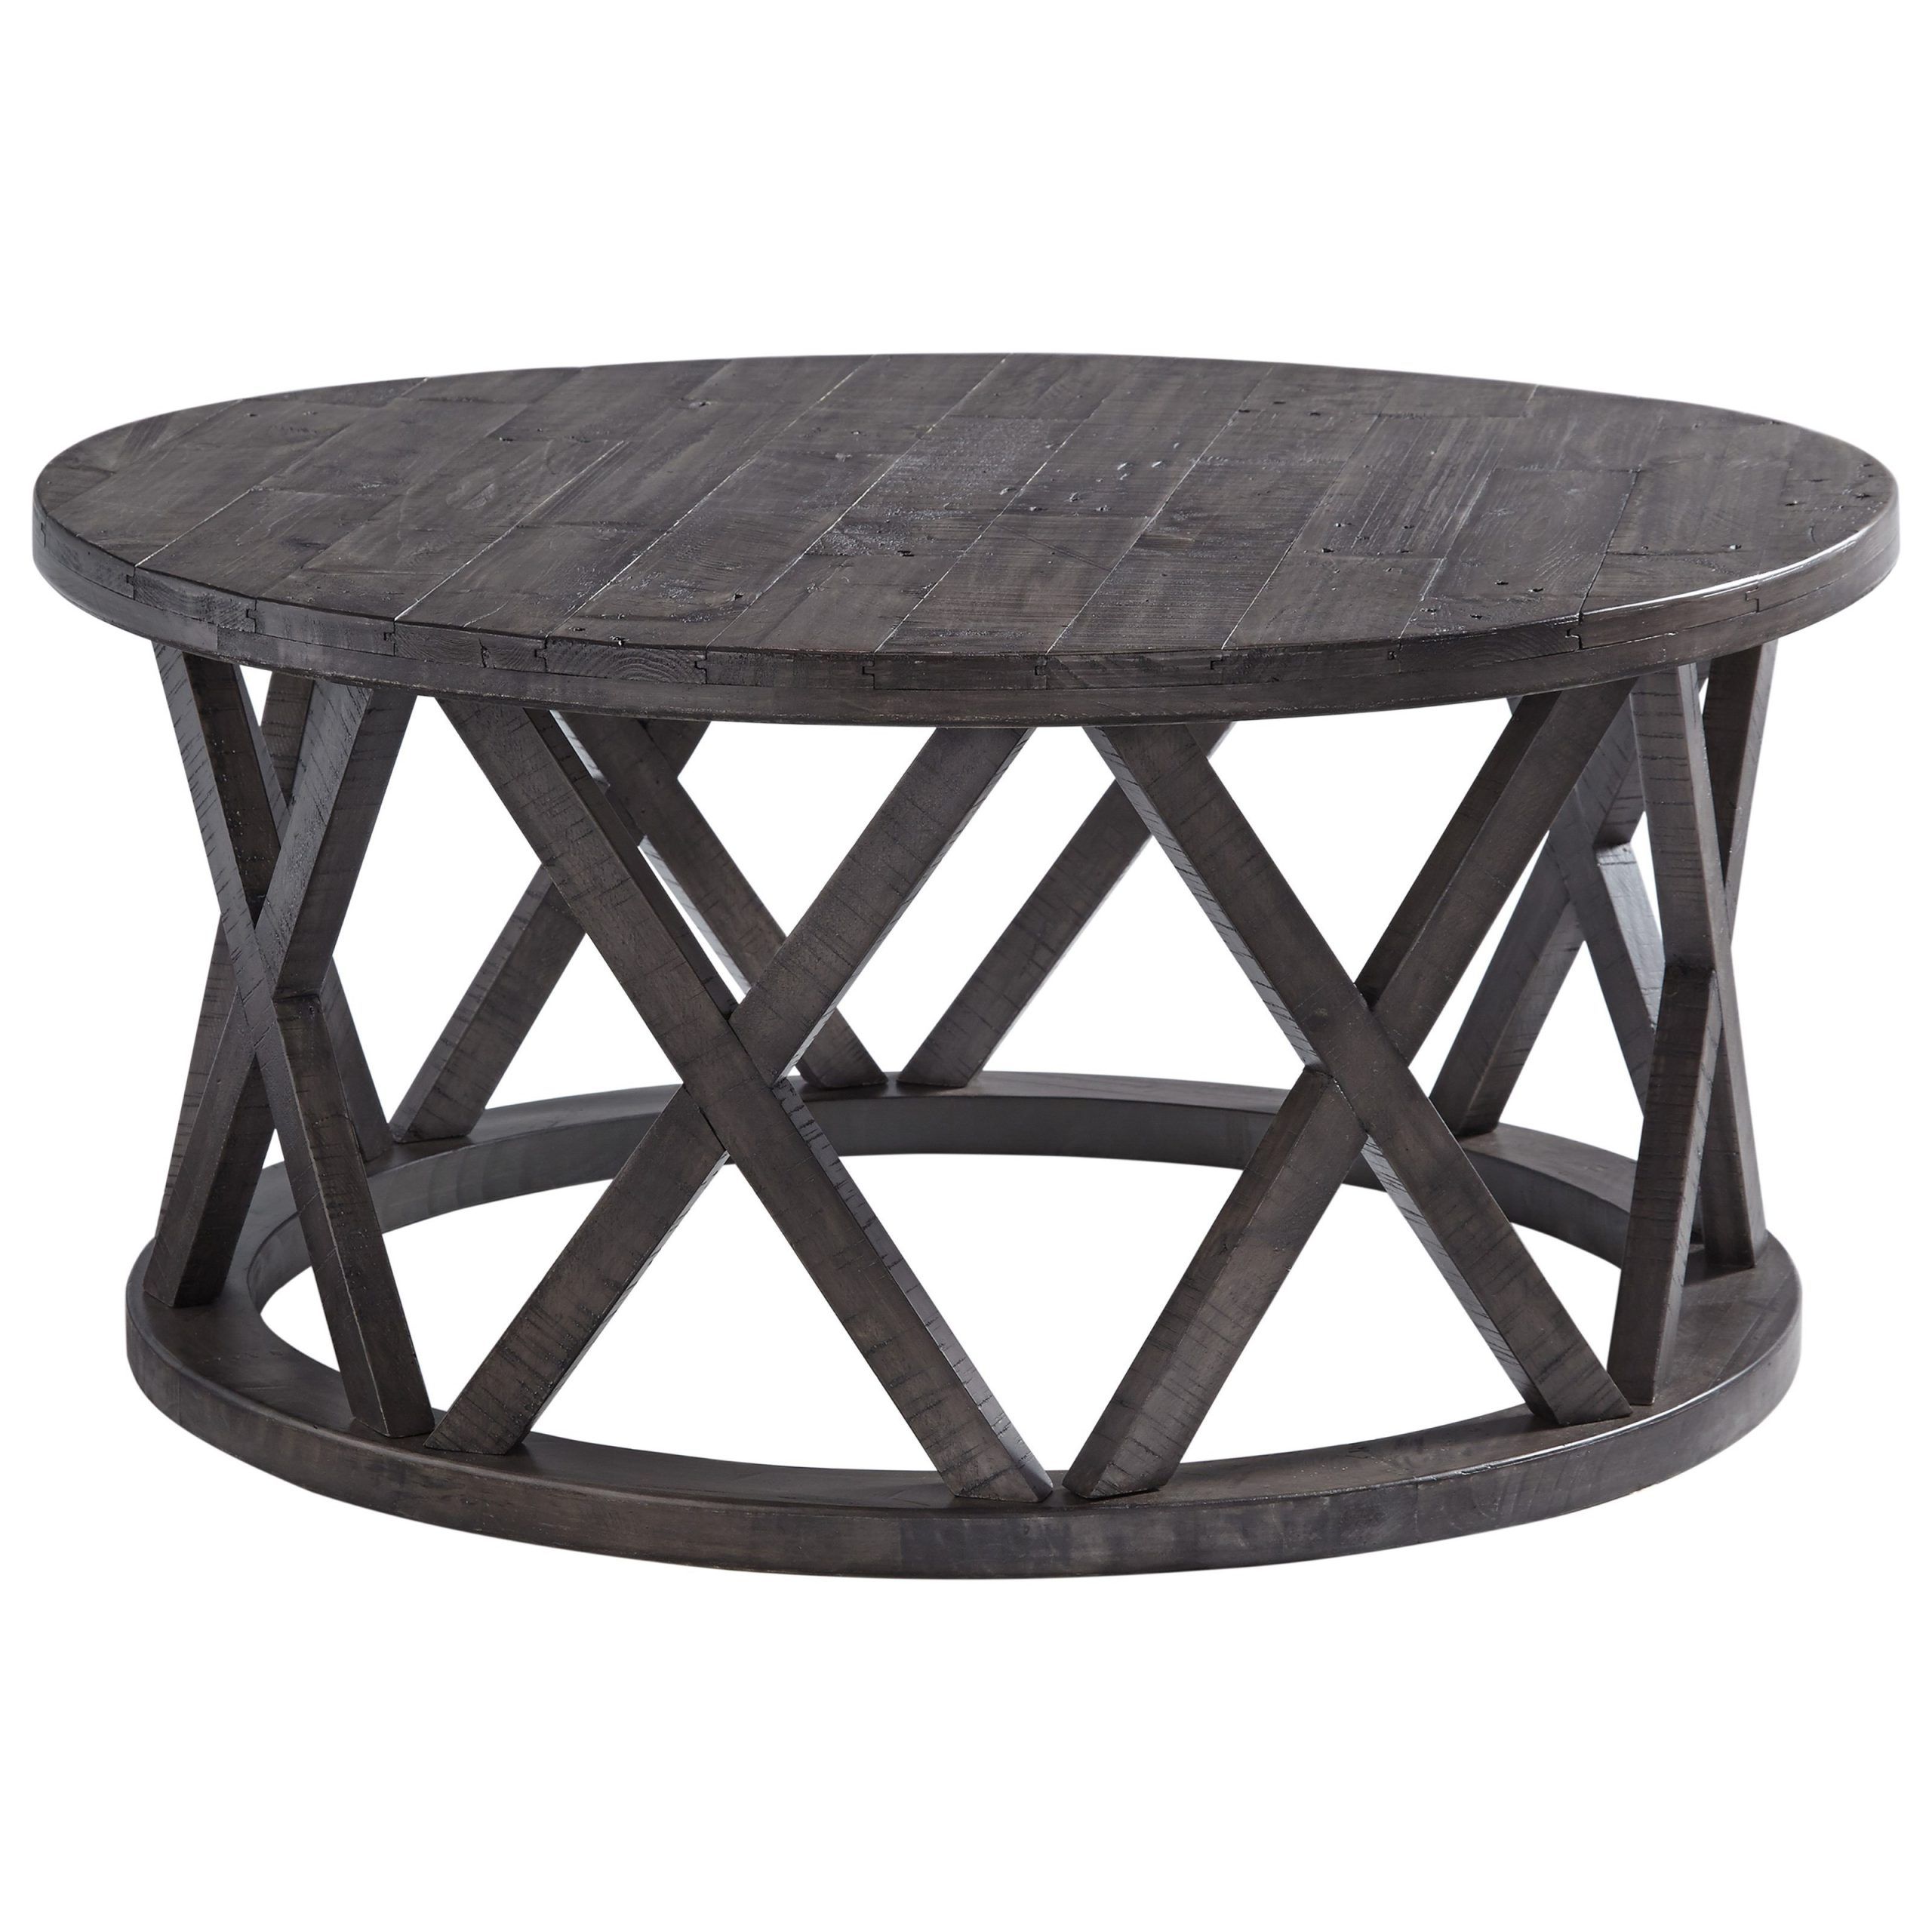 Signature Designashley Sharzane Round Cocktail Table With Regarding Gray Coastal Cocktail Tables (View 15 of 22)